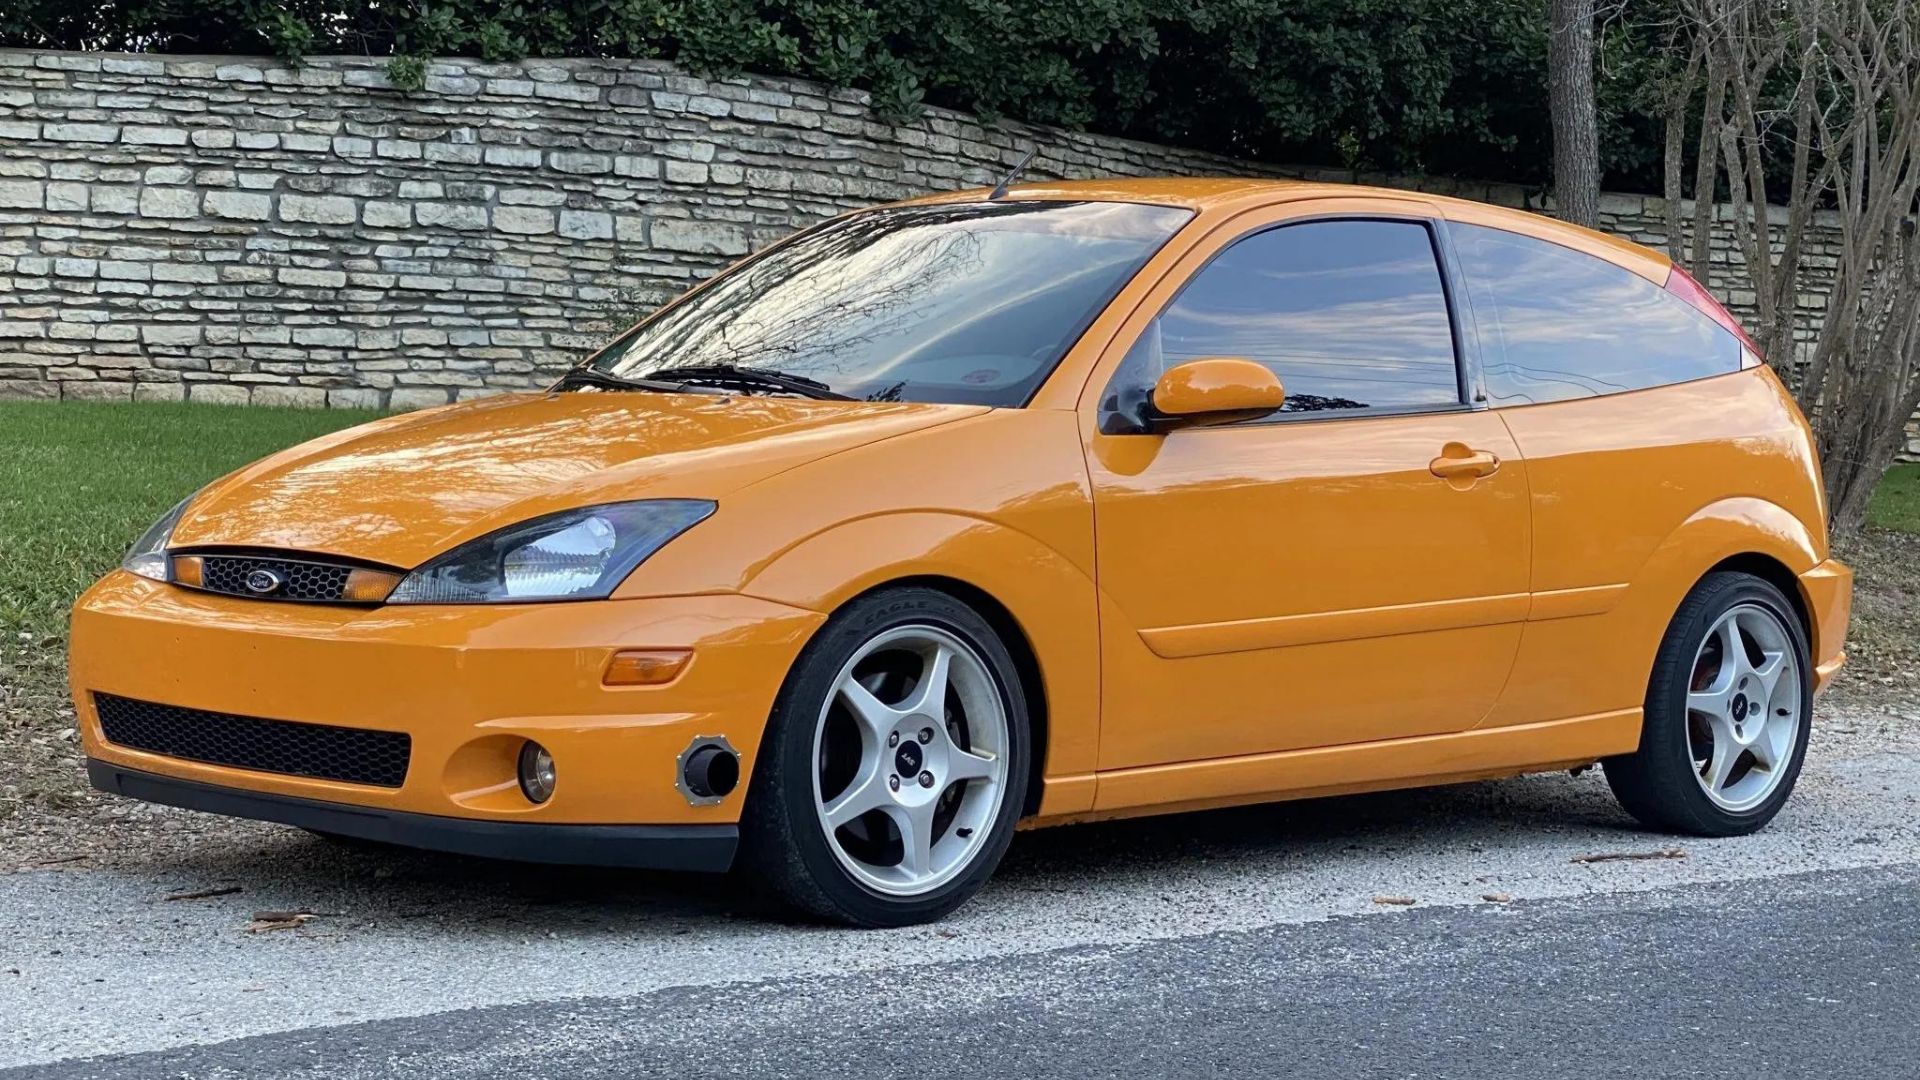 a supercharged v-8 ford focus that gives mustangs a run for their money